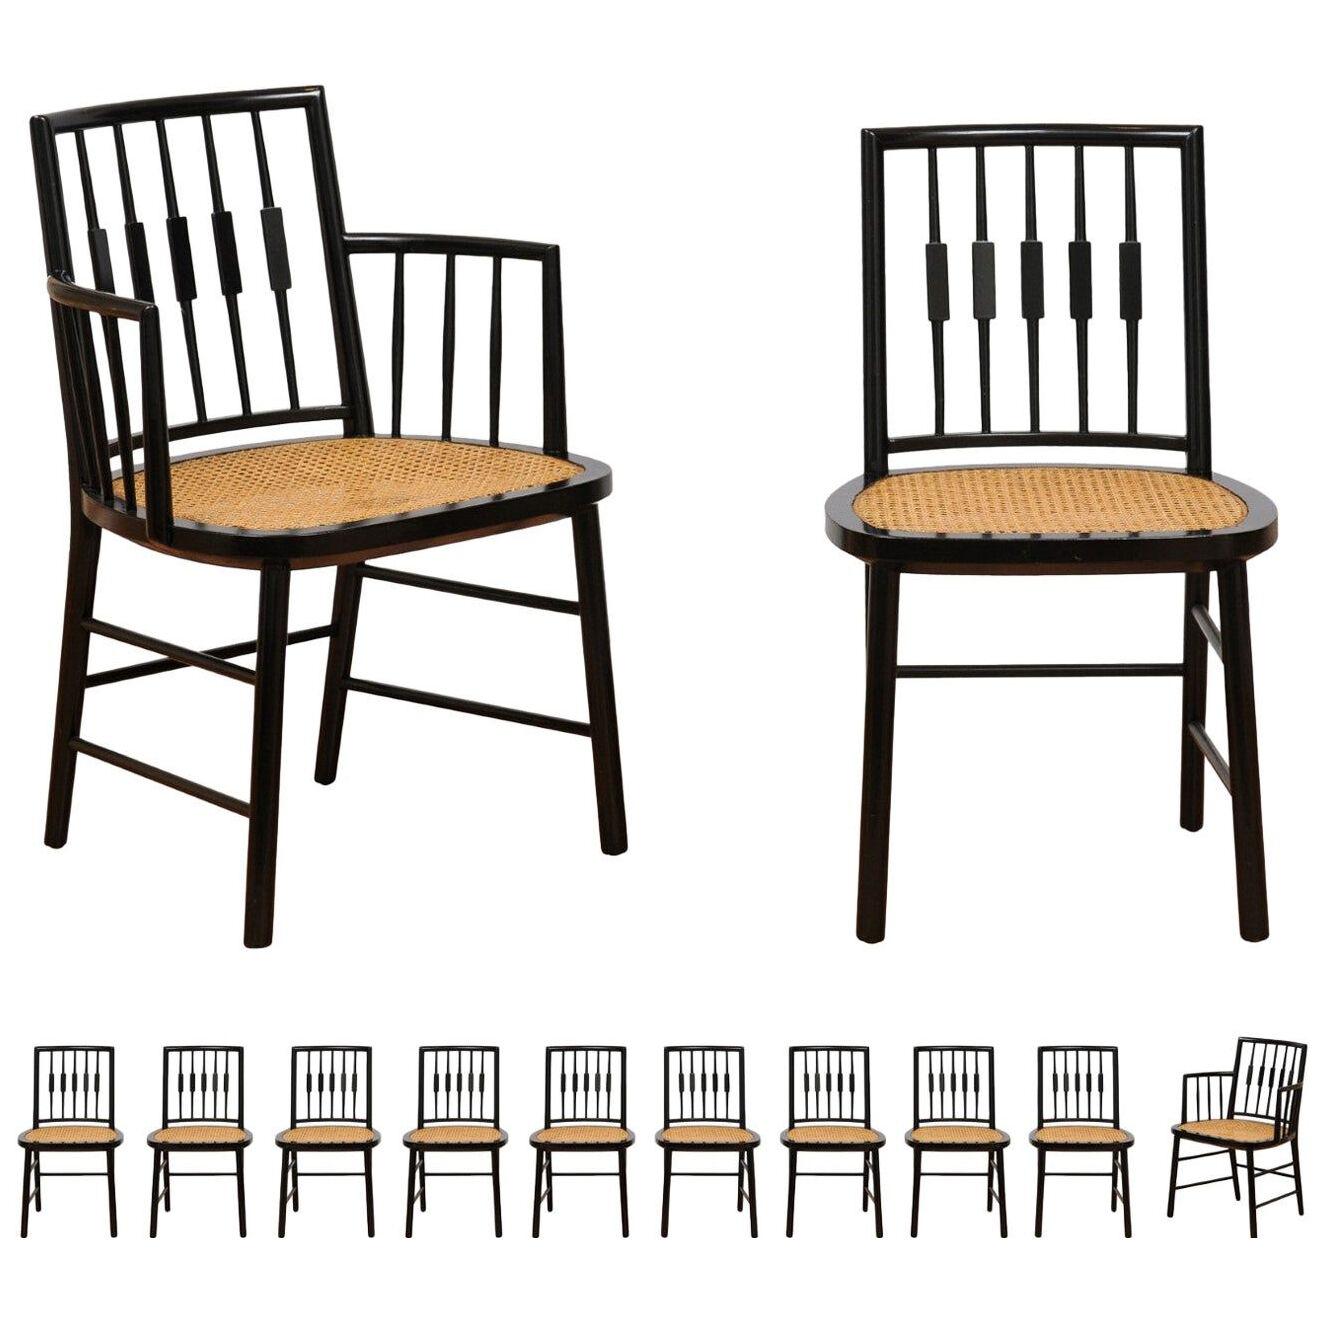 Stellar Set of 12 Modern Windsor Chairs by Michael Taylor, Cane Seats